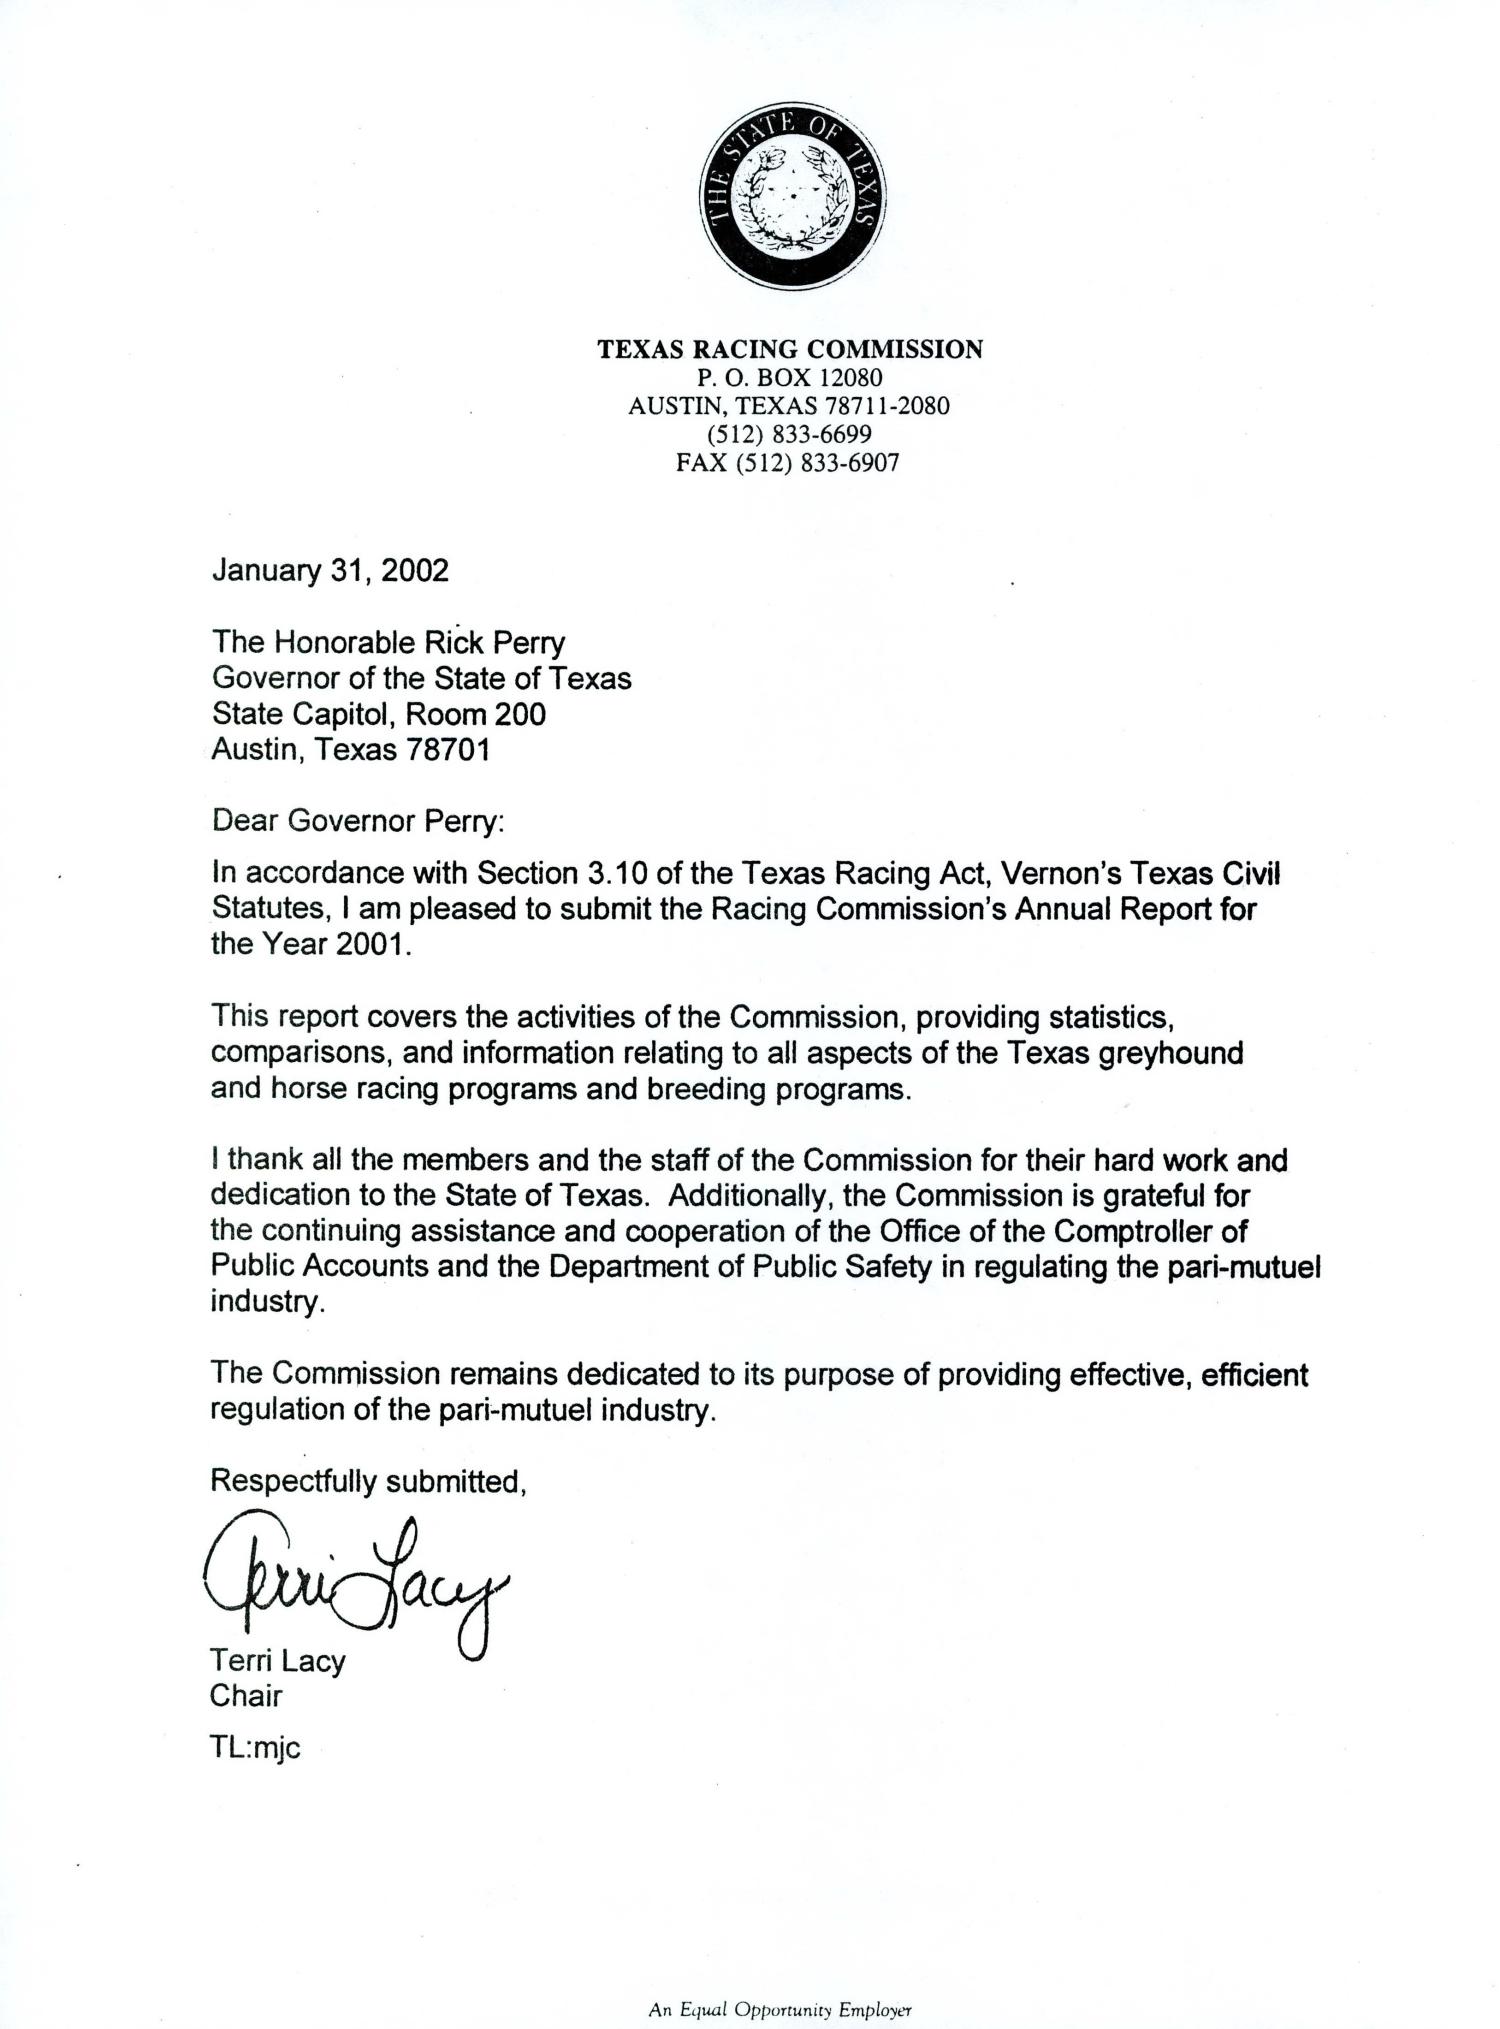 Texas Racing Commission Annual Report: 2001
                                                
                                                    LETTER OF TRANSMITTAL
                                                